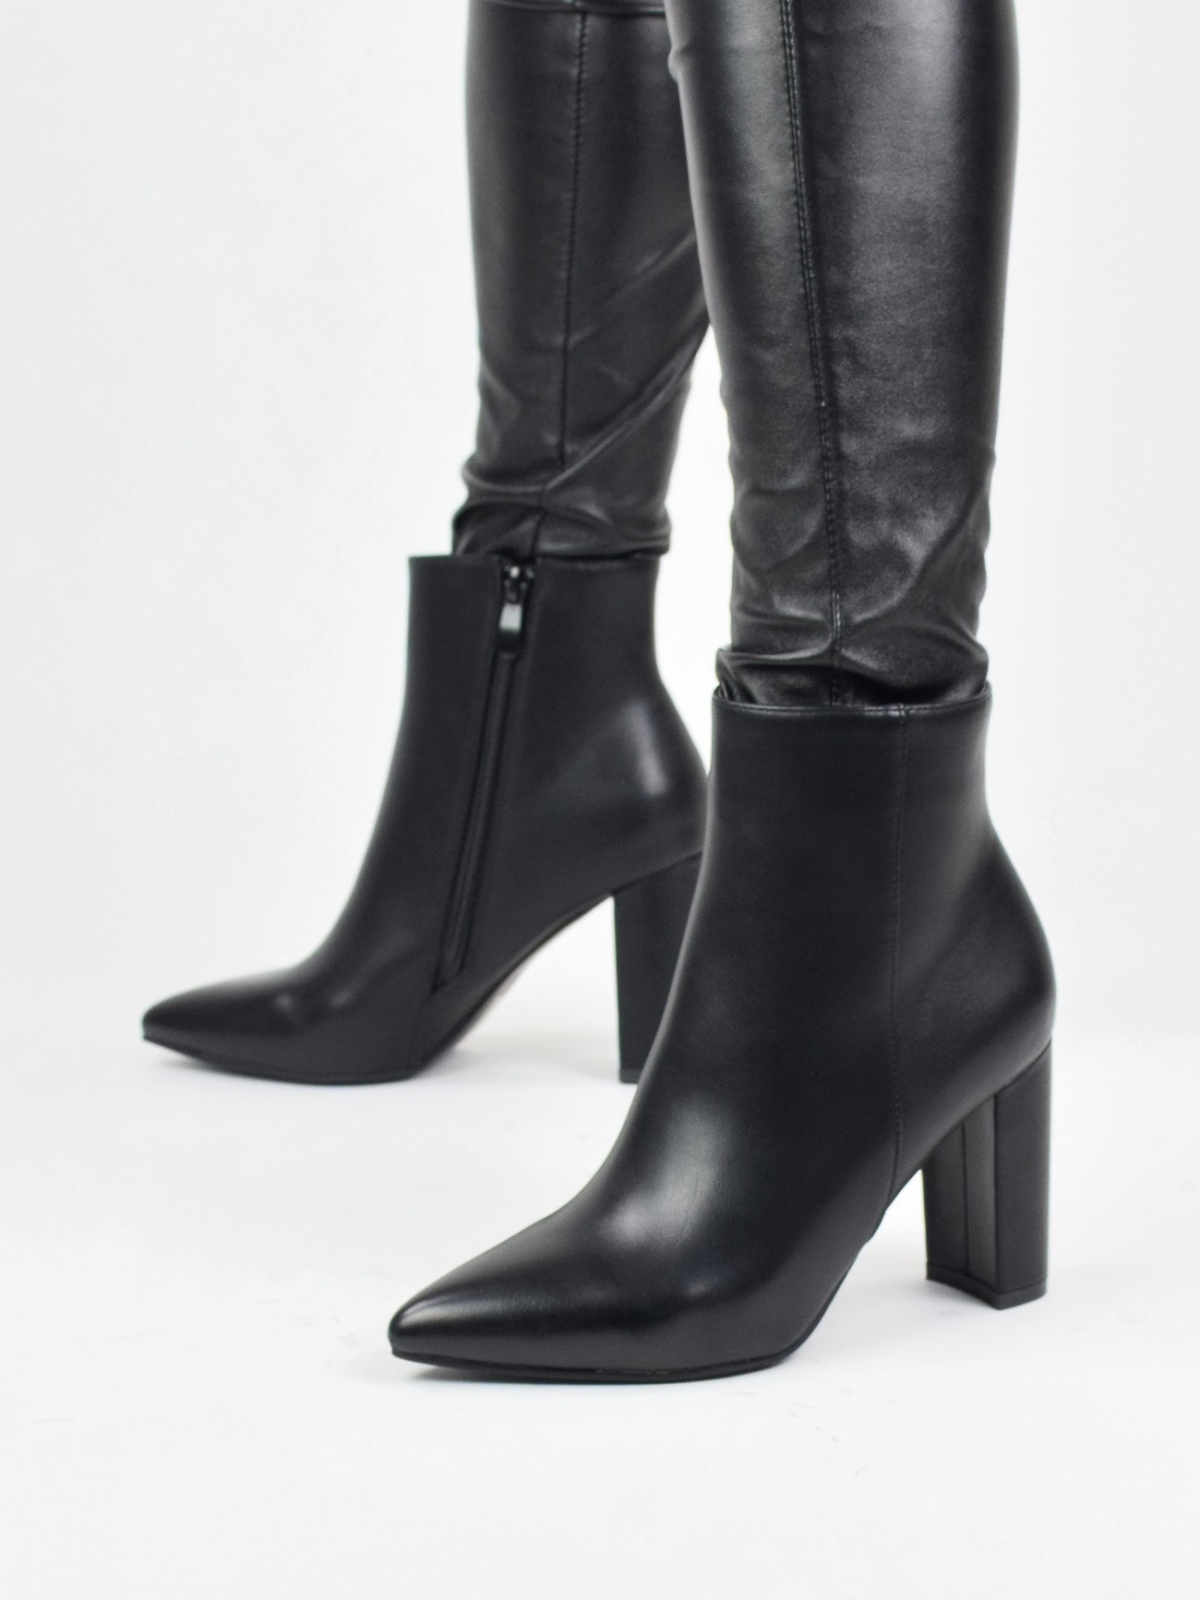 High heeled lace up ankle boots in black